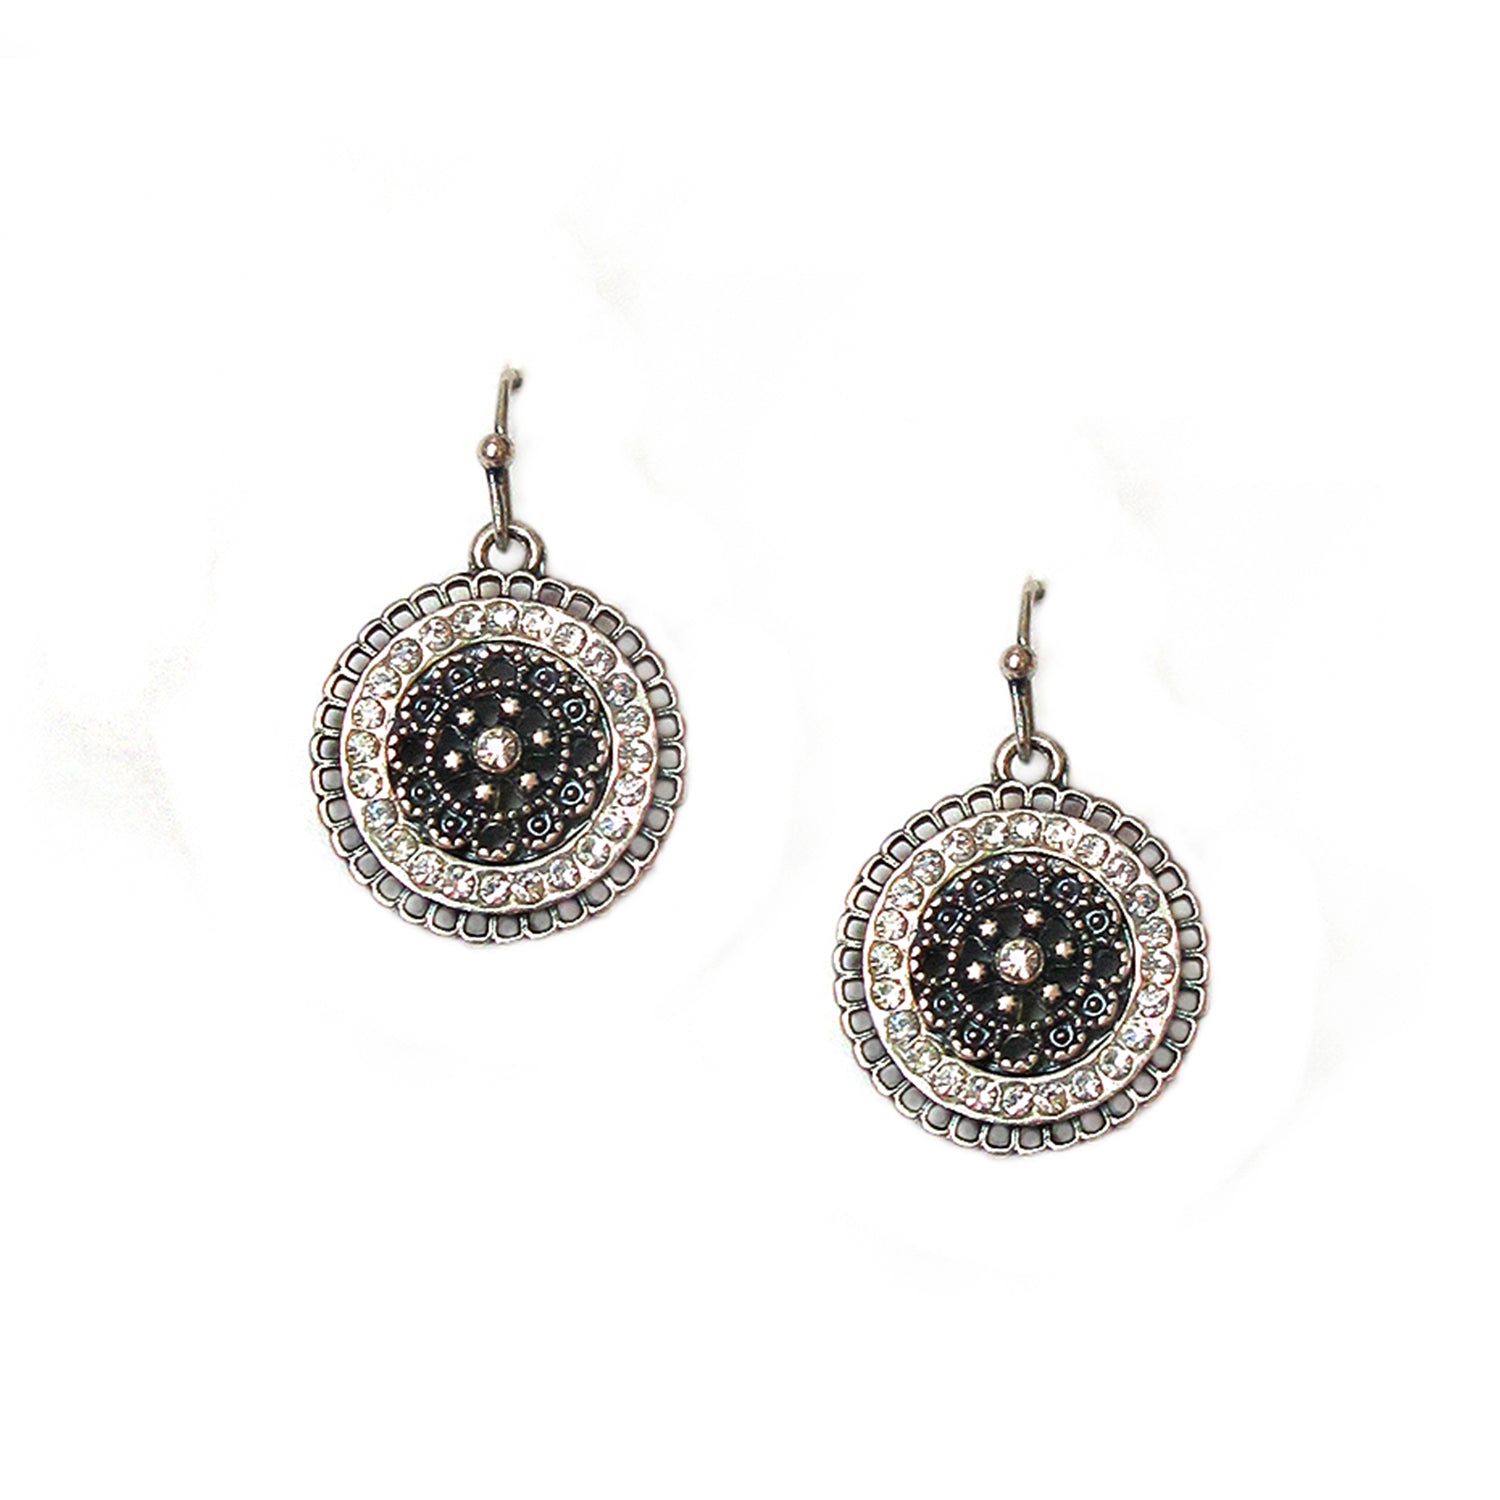 ESSFF Gold Color Round Resin Crystal Long Drop Earrings for Women